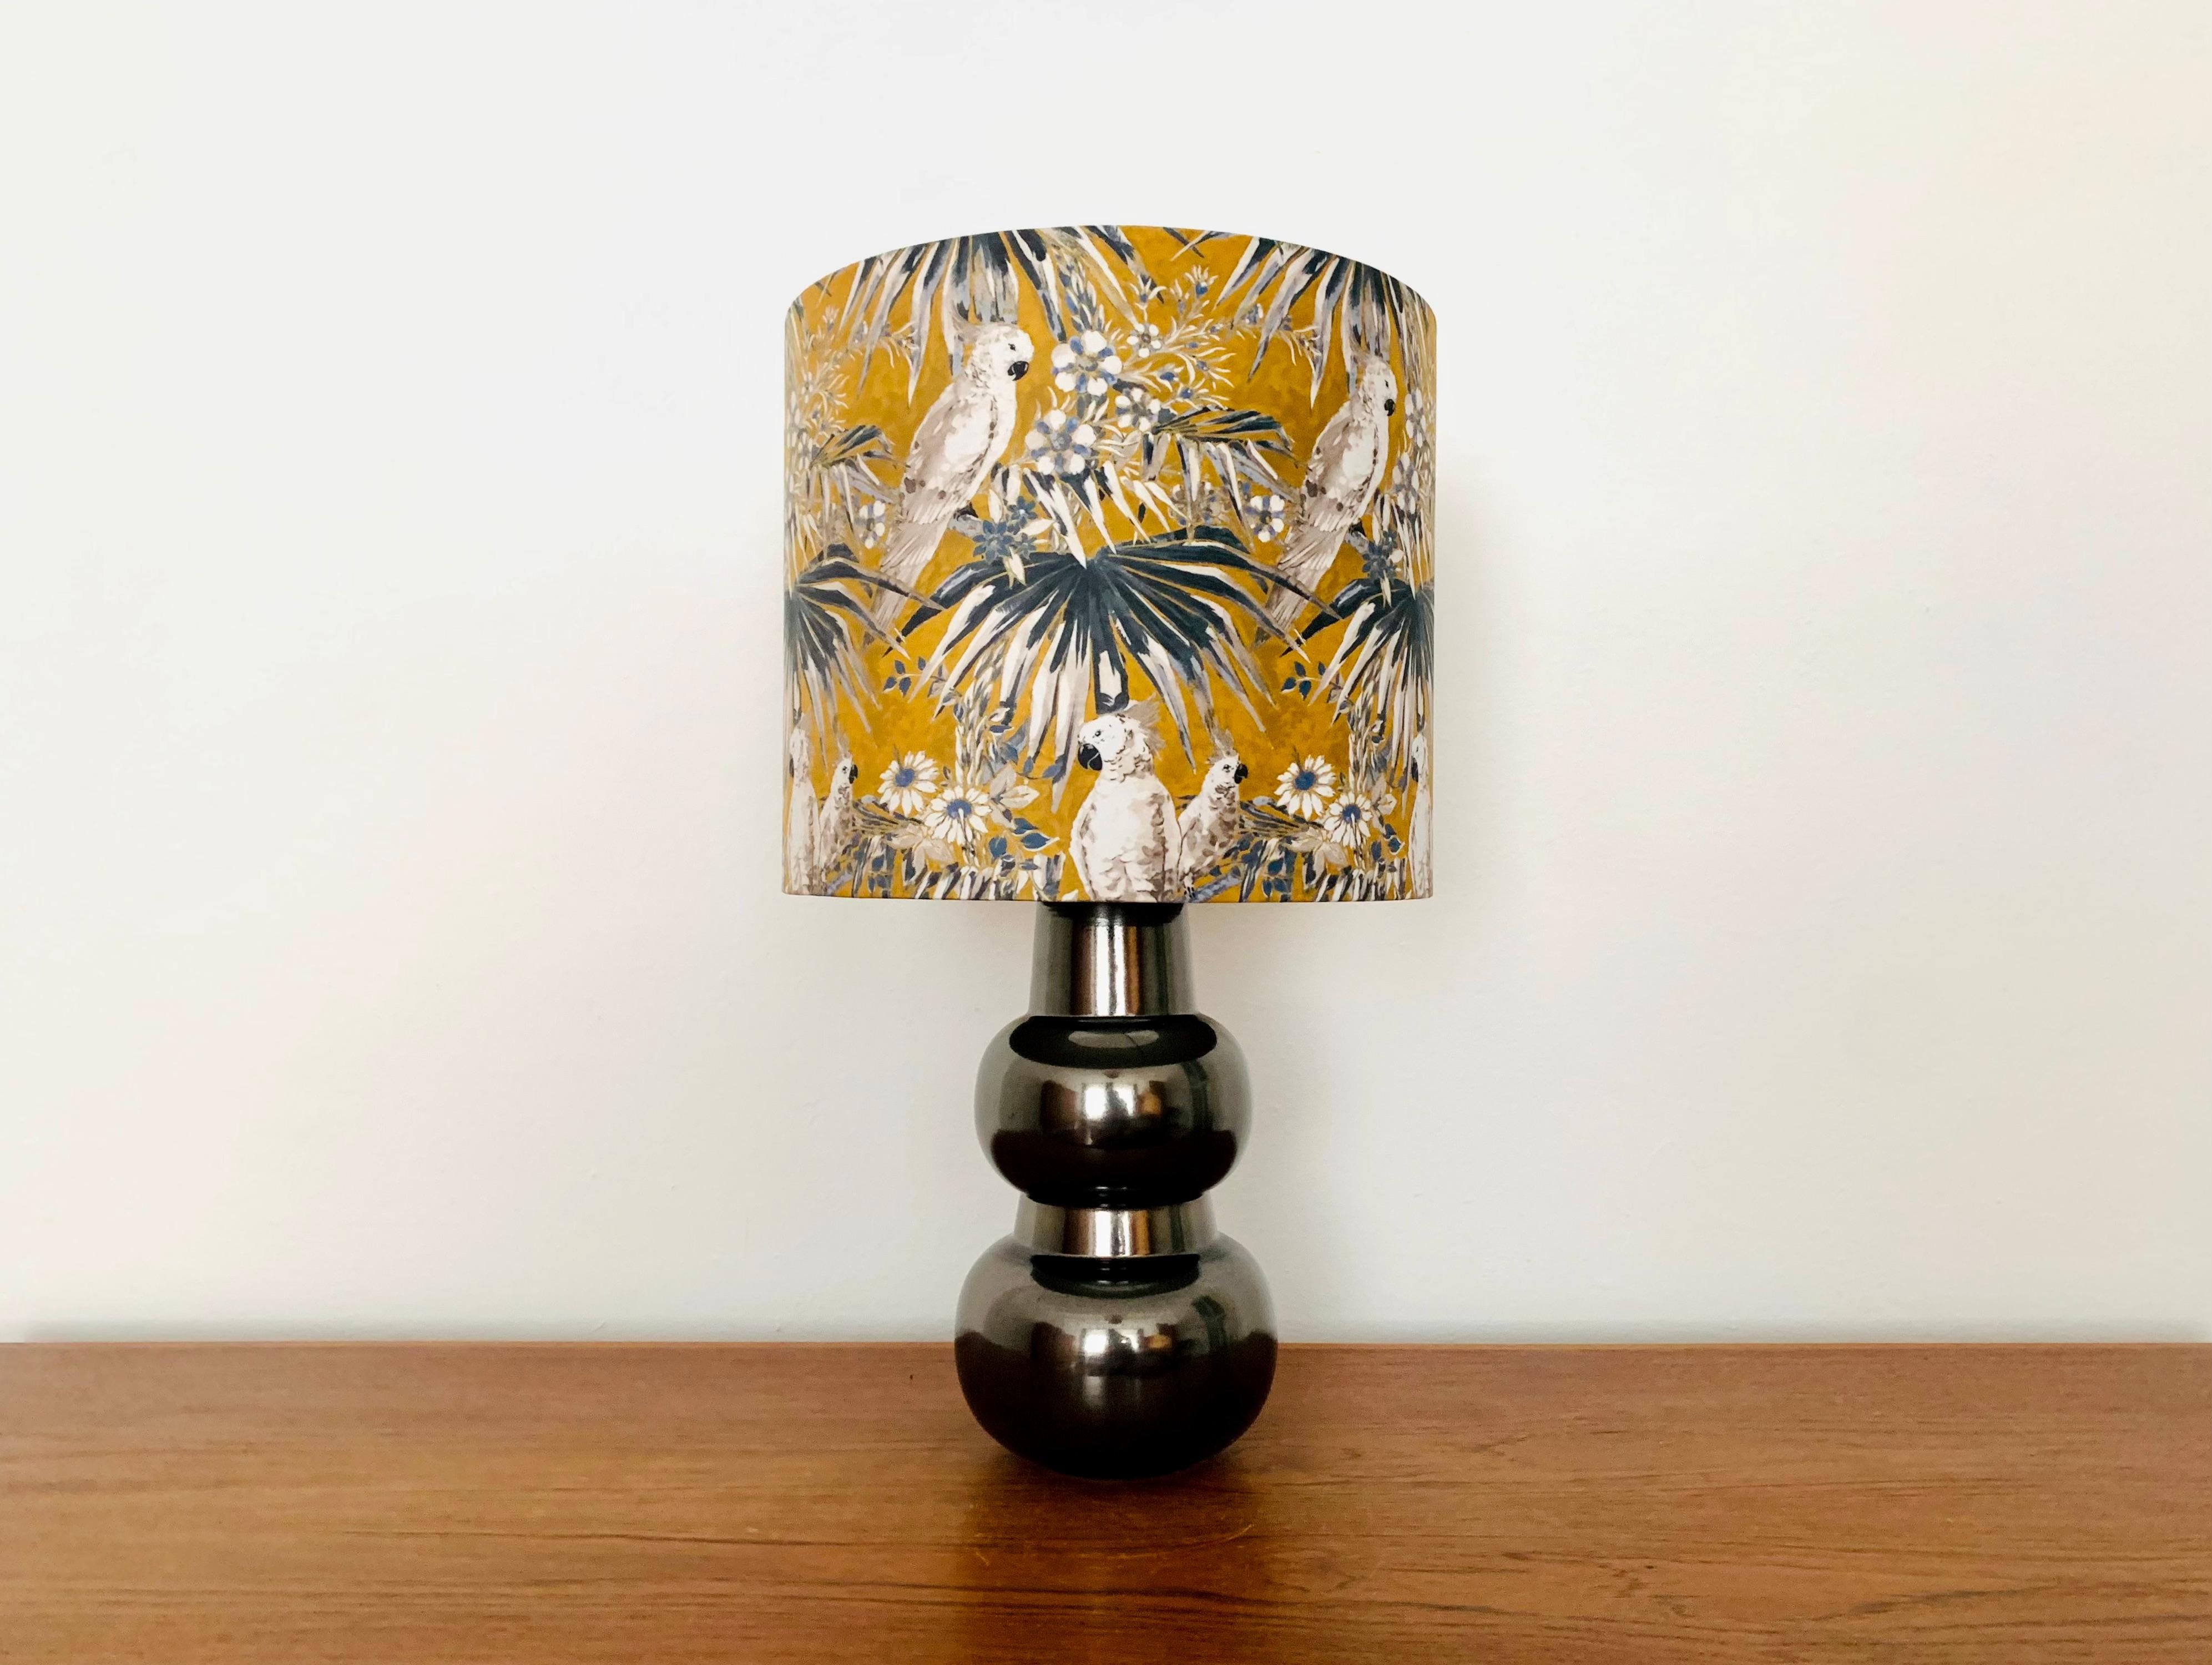 Wonderful ceramic table lamp from the 1960s.
Extremely high-quality workmanship and very beautiful design.
The dark brown ceramic base has a particularly beautiful glaze with a metallic sheen.
A very cozy light is created.


Condition:

Very good